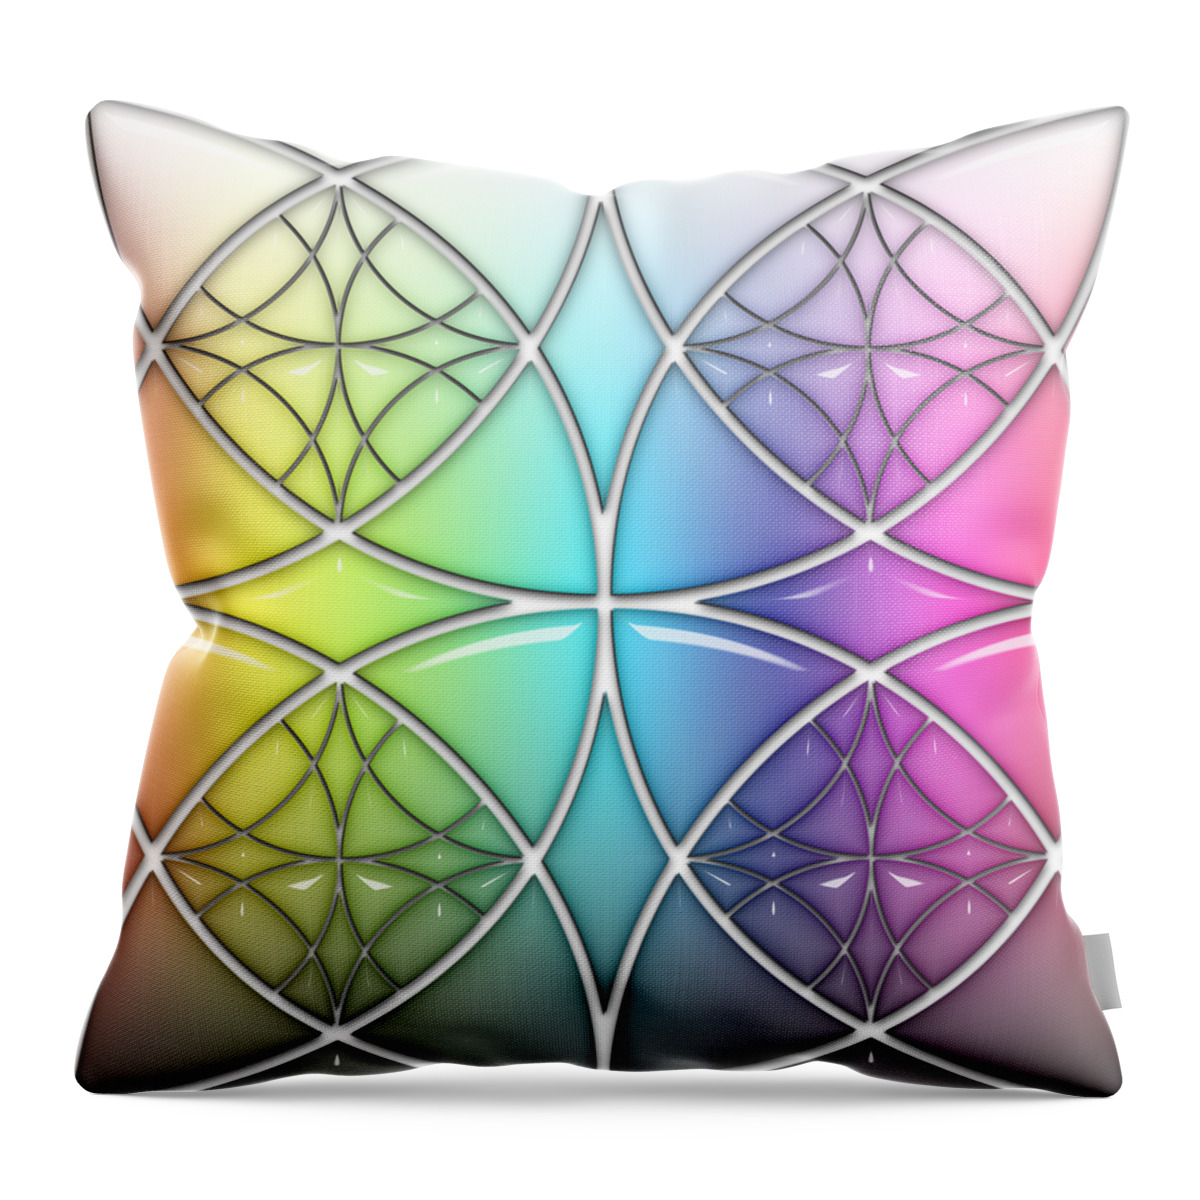 Clover Throw Pillow featuring the digital art Clover Star Soft Rainbow Drop by DiDesigns Graphics